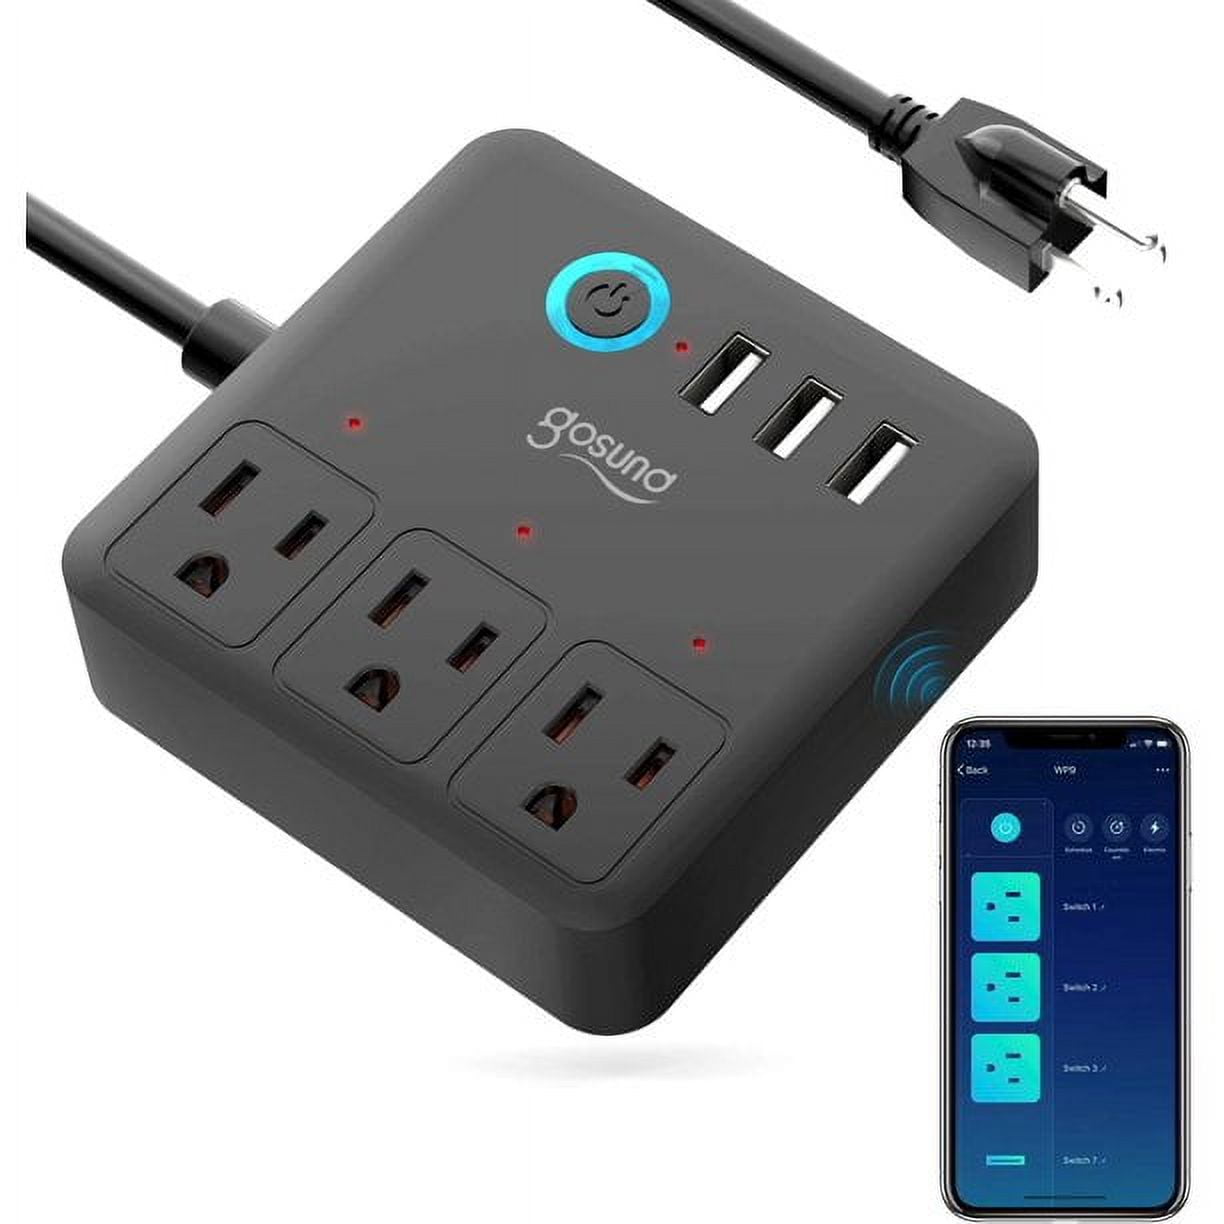 Brightech Outdoor Wi-Fi Smart Plug - Alexa, Echo, Google Home Compatible,  No Hub Required - 2 Grounded Sockets - Timer and Schedule Function - Max  Power 1200W, - 2.4 Ghz Network Only 